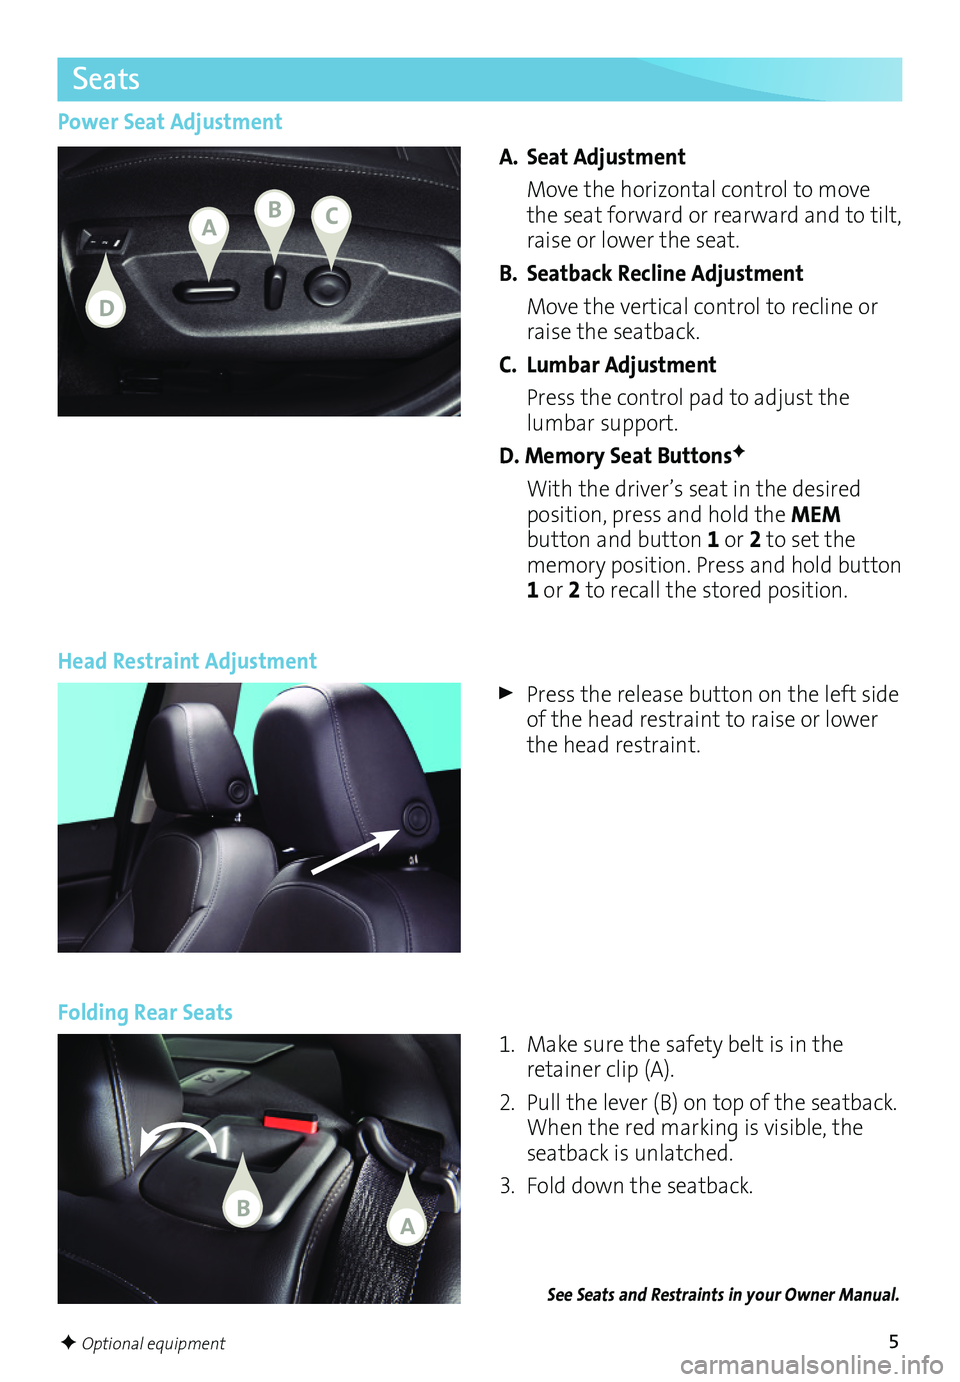 BUICK REGAL 2016  Get To Know Guide 5
Power Seat Adjustment
A. Seat Adjustment
 Move the horizontal control to move the seat forward or rearward and to tilt, raise or lower the seat.
B. Seatback Recline Adjustment
 Move the vertical con